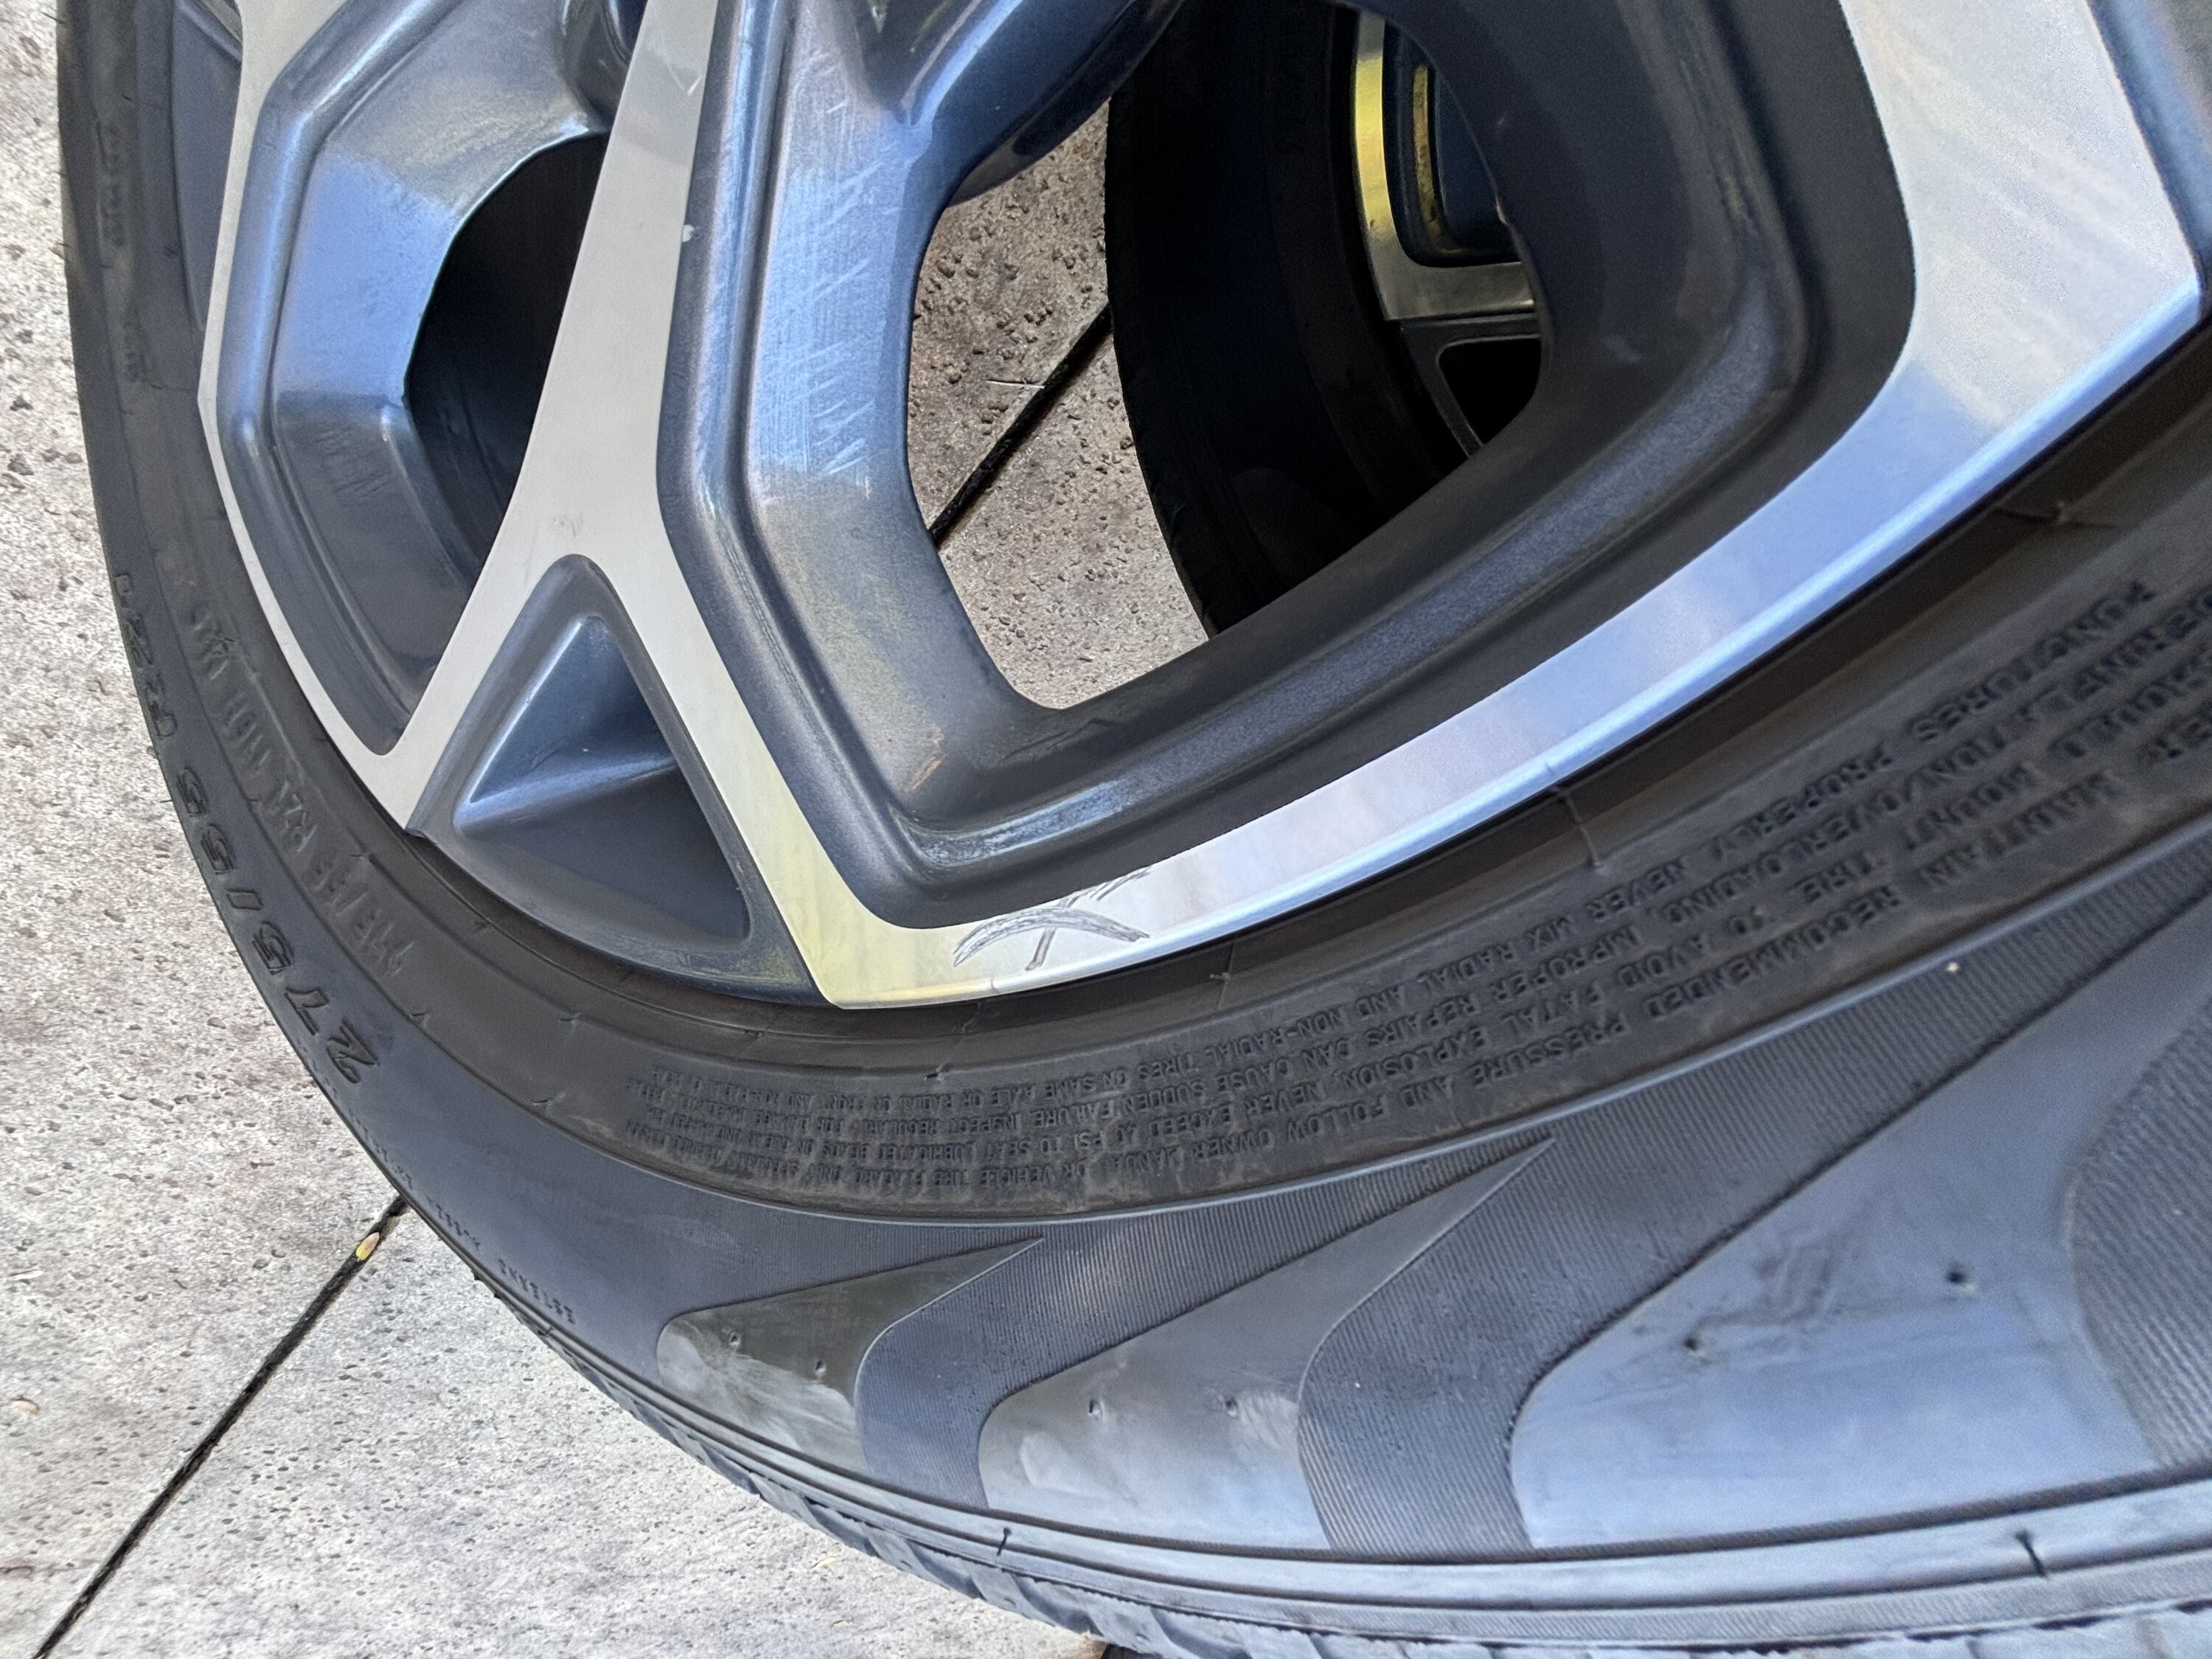 Rivian R1T R1S 3 individual 21” wheels and tires for spares $250 each - Sacramento and Foothills Area IMG_5709